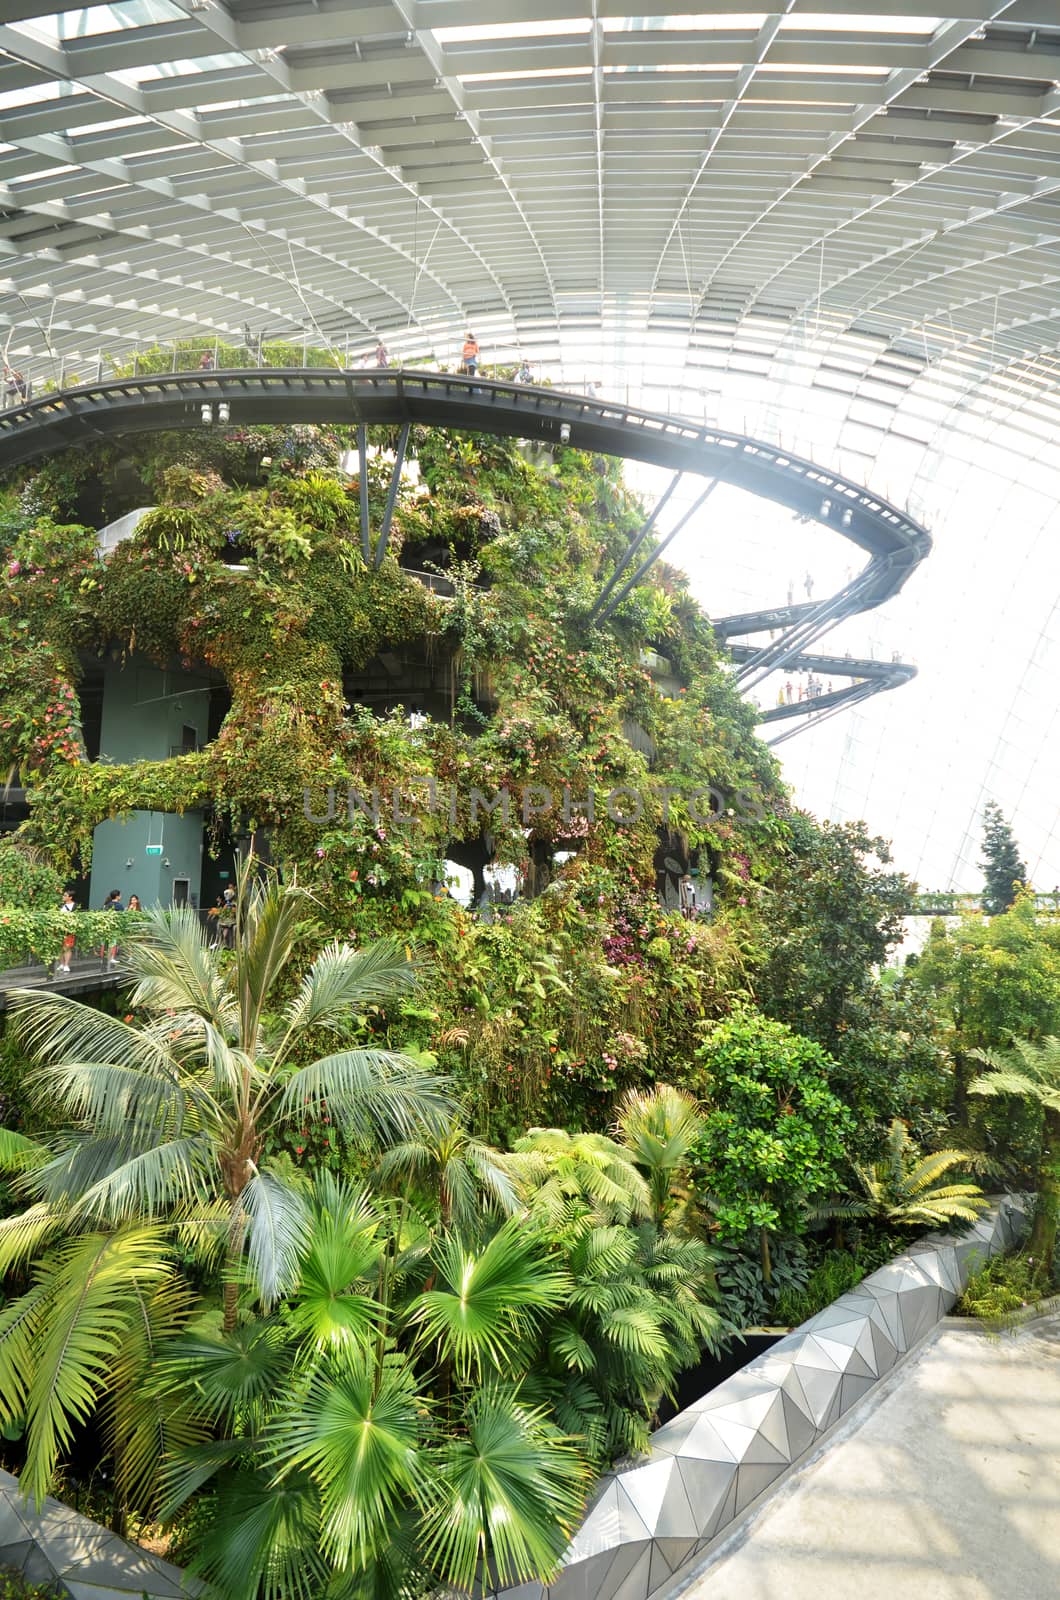 SINGAPORE- SEP 5: View of Cloud Forest at Gardens by the Bay on September 5, 2015. in Singapore. Gardens by the Bay is a park spanning 101 hectares of reclaimed land.